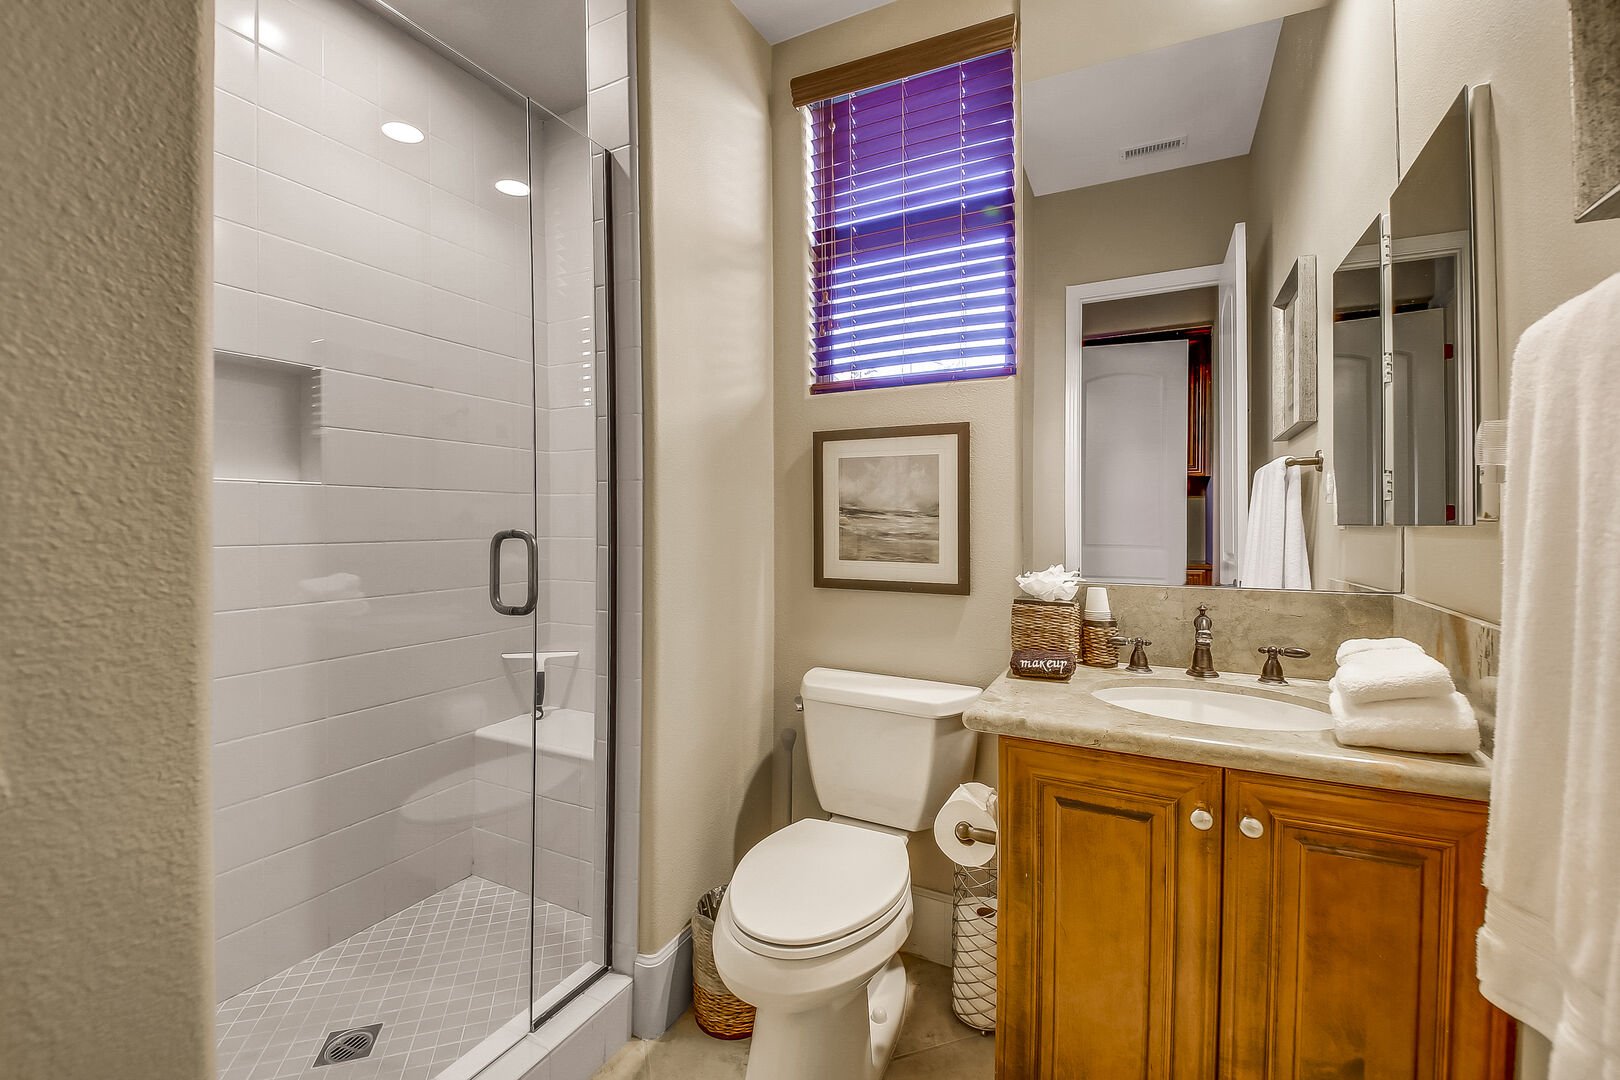 The private en suite bathroom features a tile shower and a vanity sink.